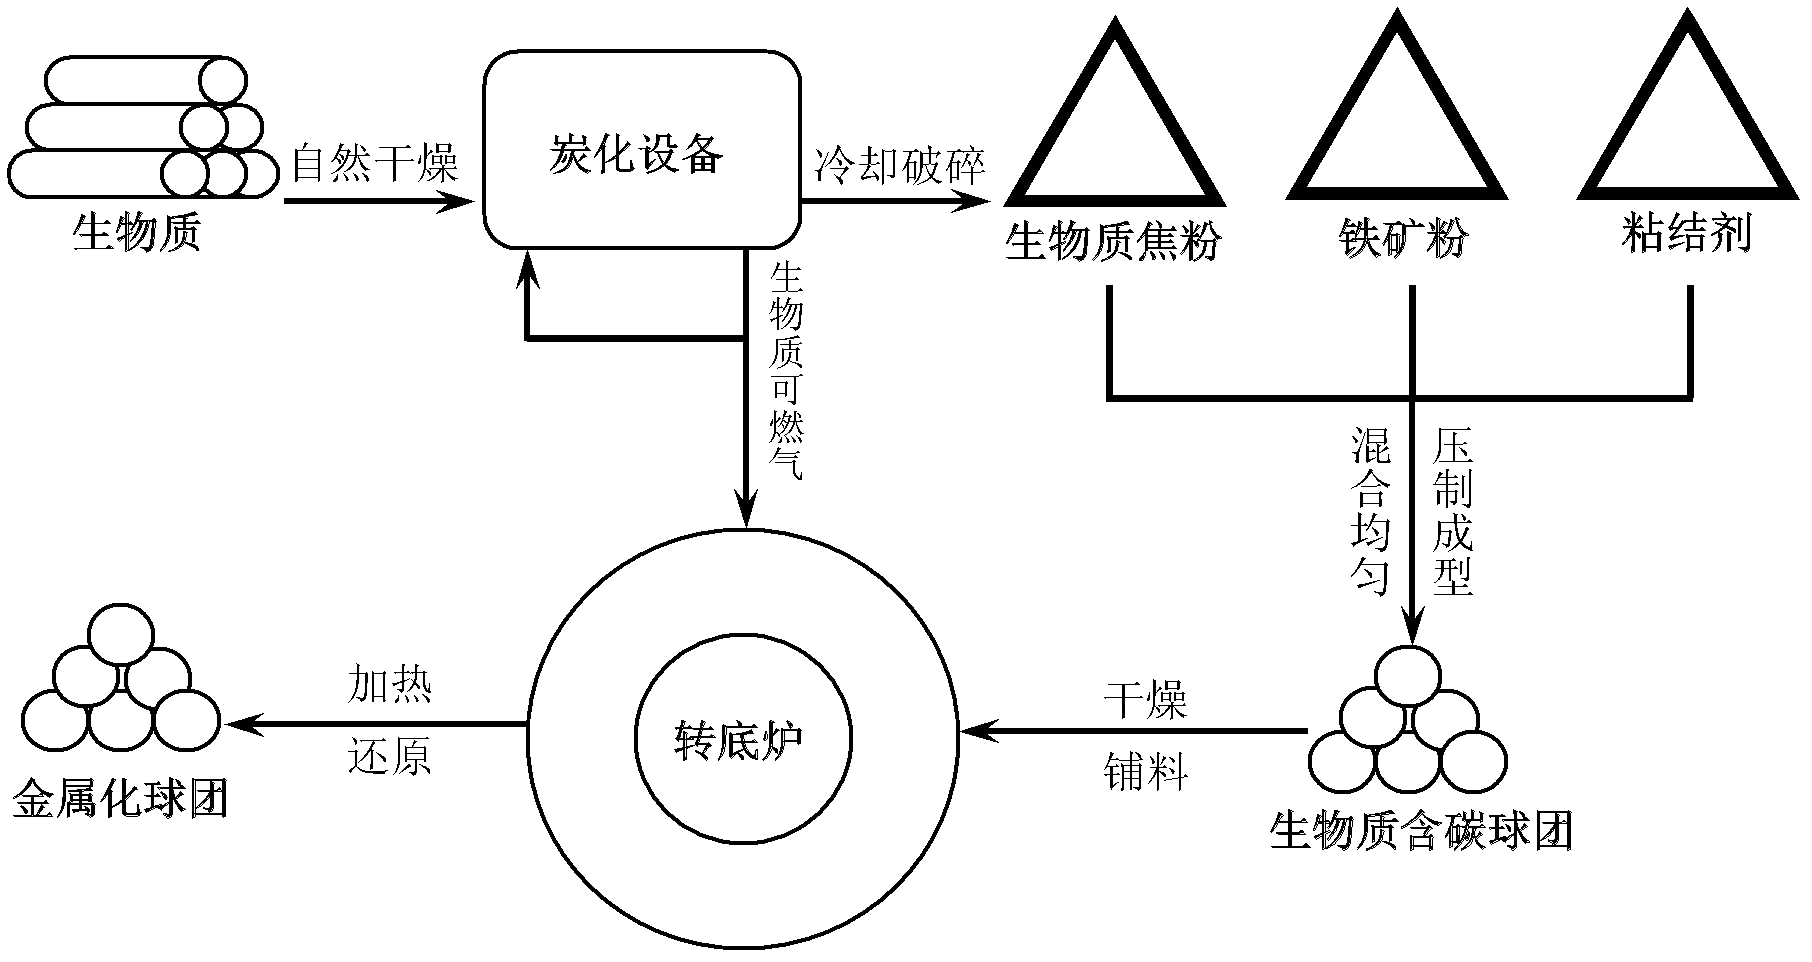 Rotary hearth furnace iron-making method utilizing biomass carbon-containing pellet to serve as raw material